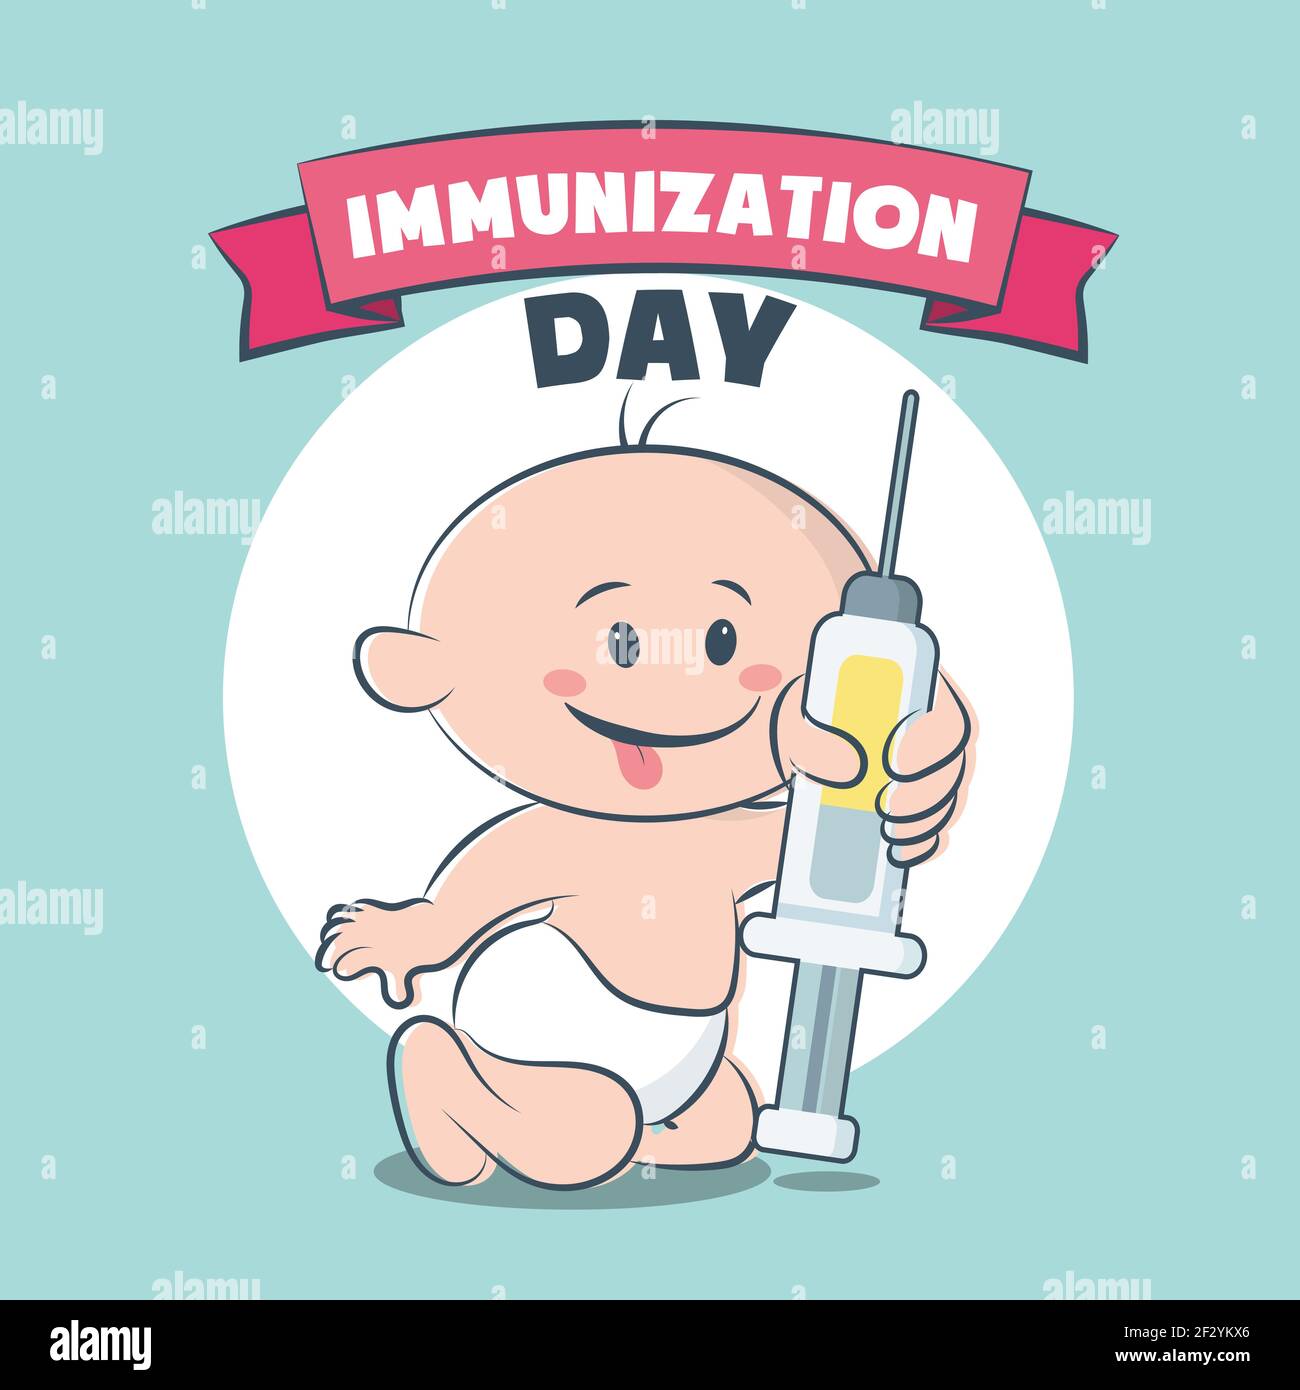 Immunization Day poster, baby child vaccination with injection illustration banner vector Stock Vector